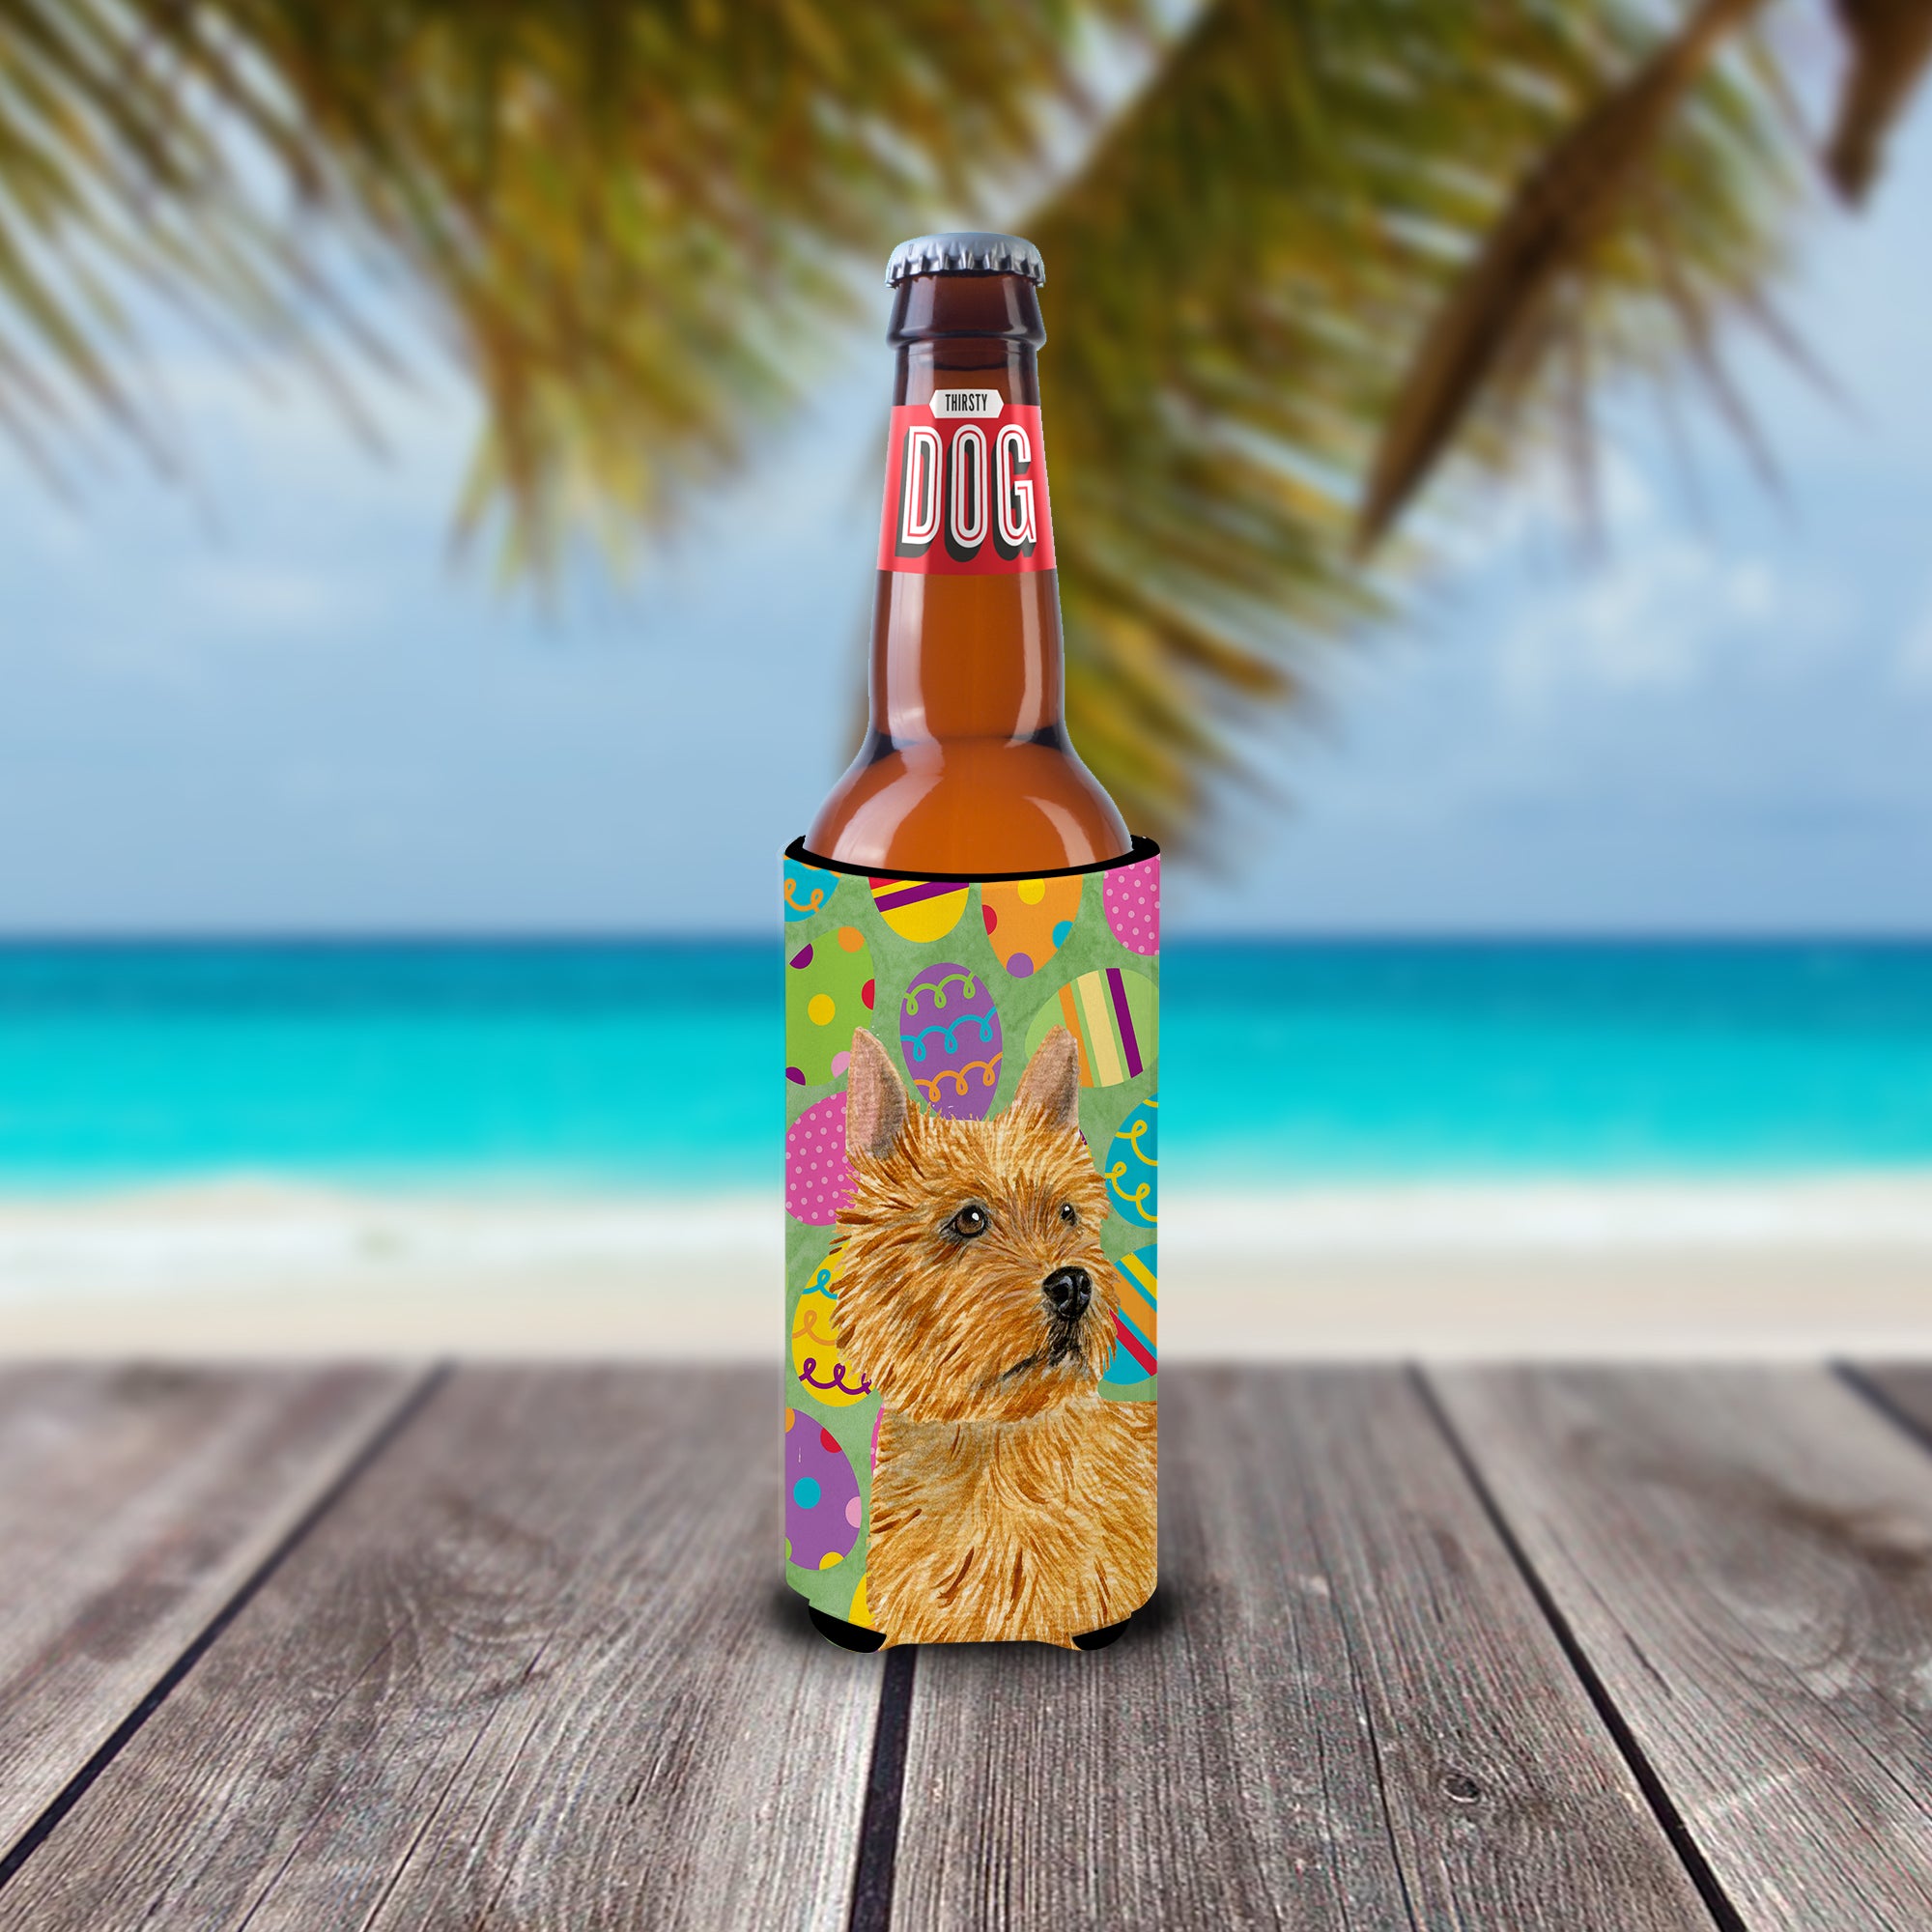 Norwich Terrier Easter Eggtravaganza Ultra Beverage Insulators for slim cans SS4844MUK.